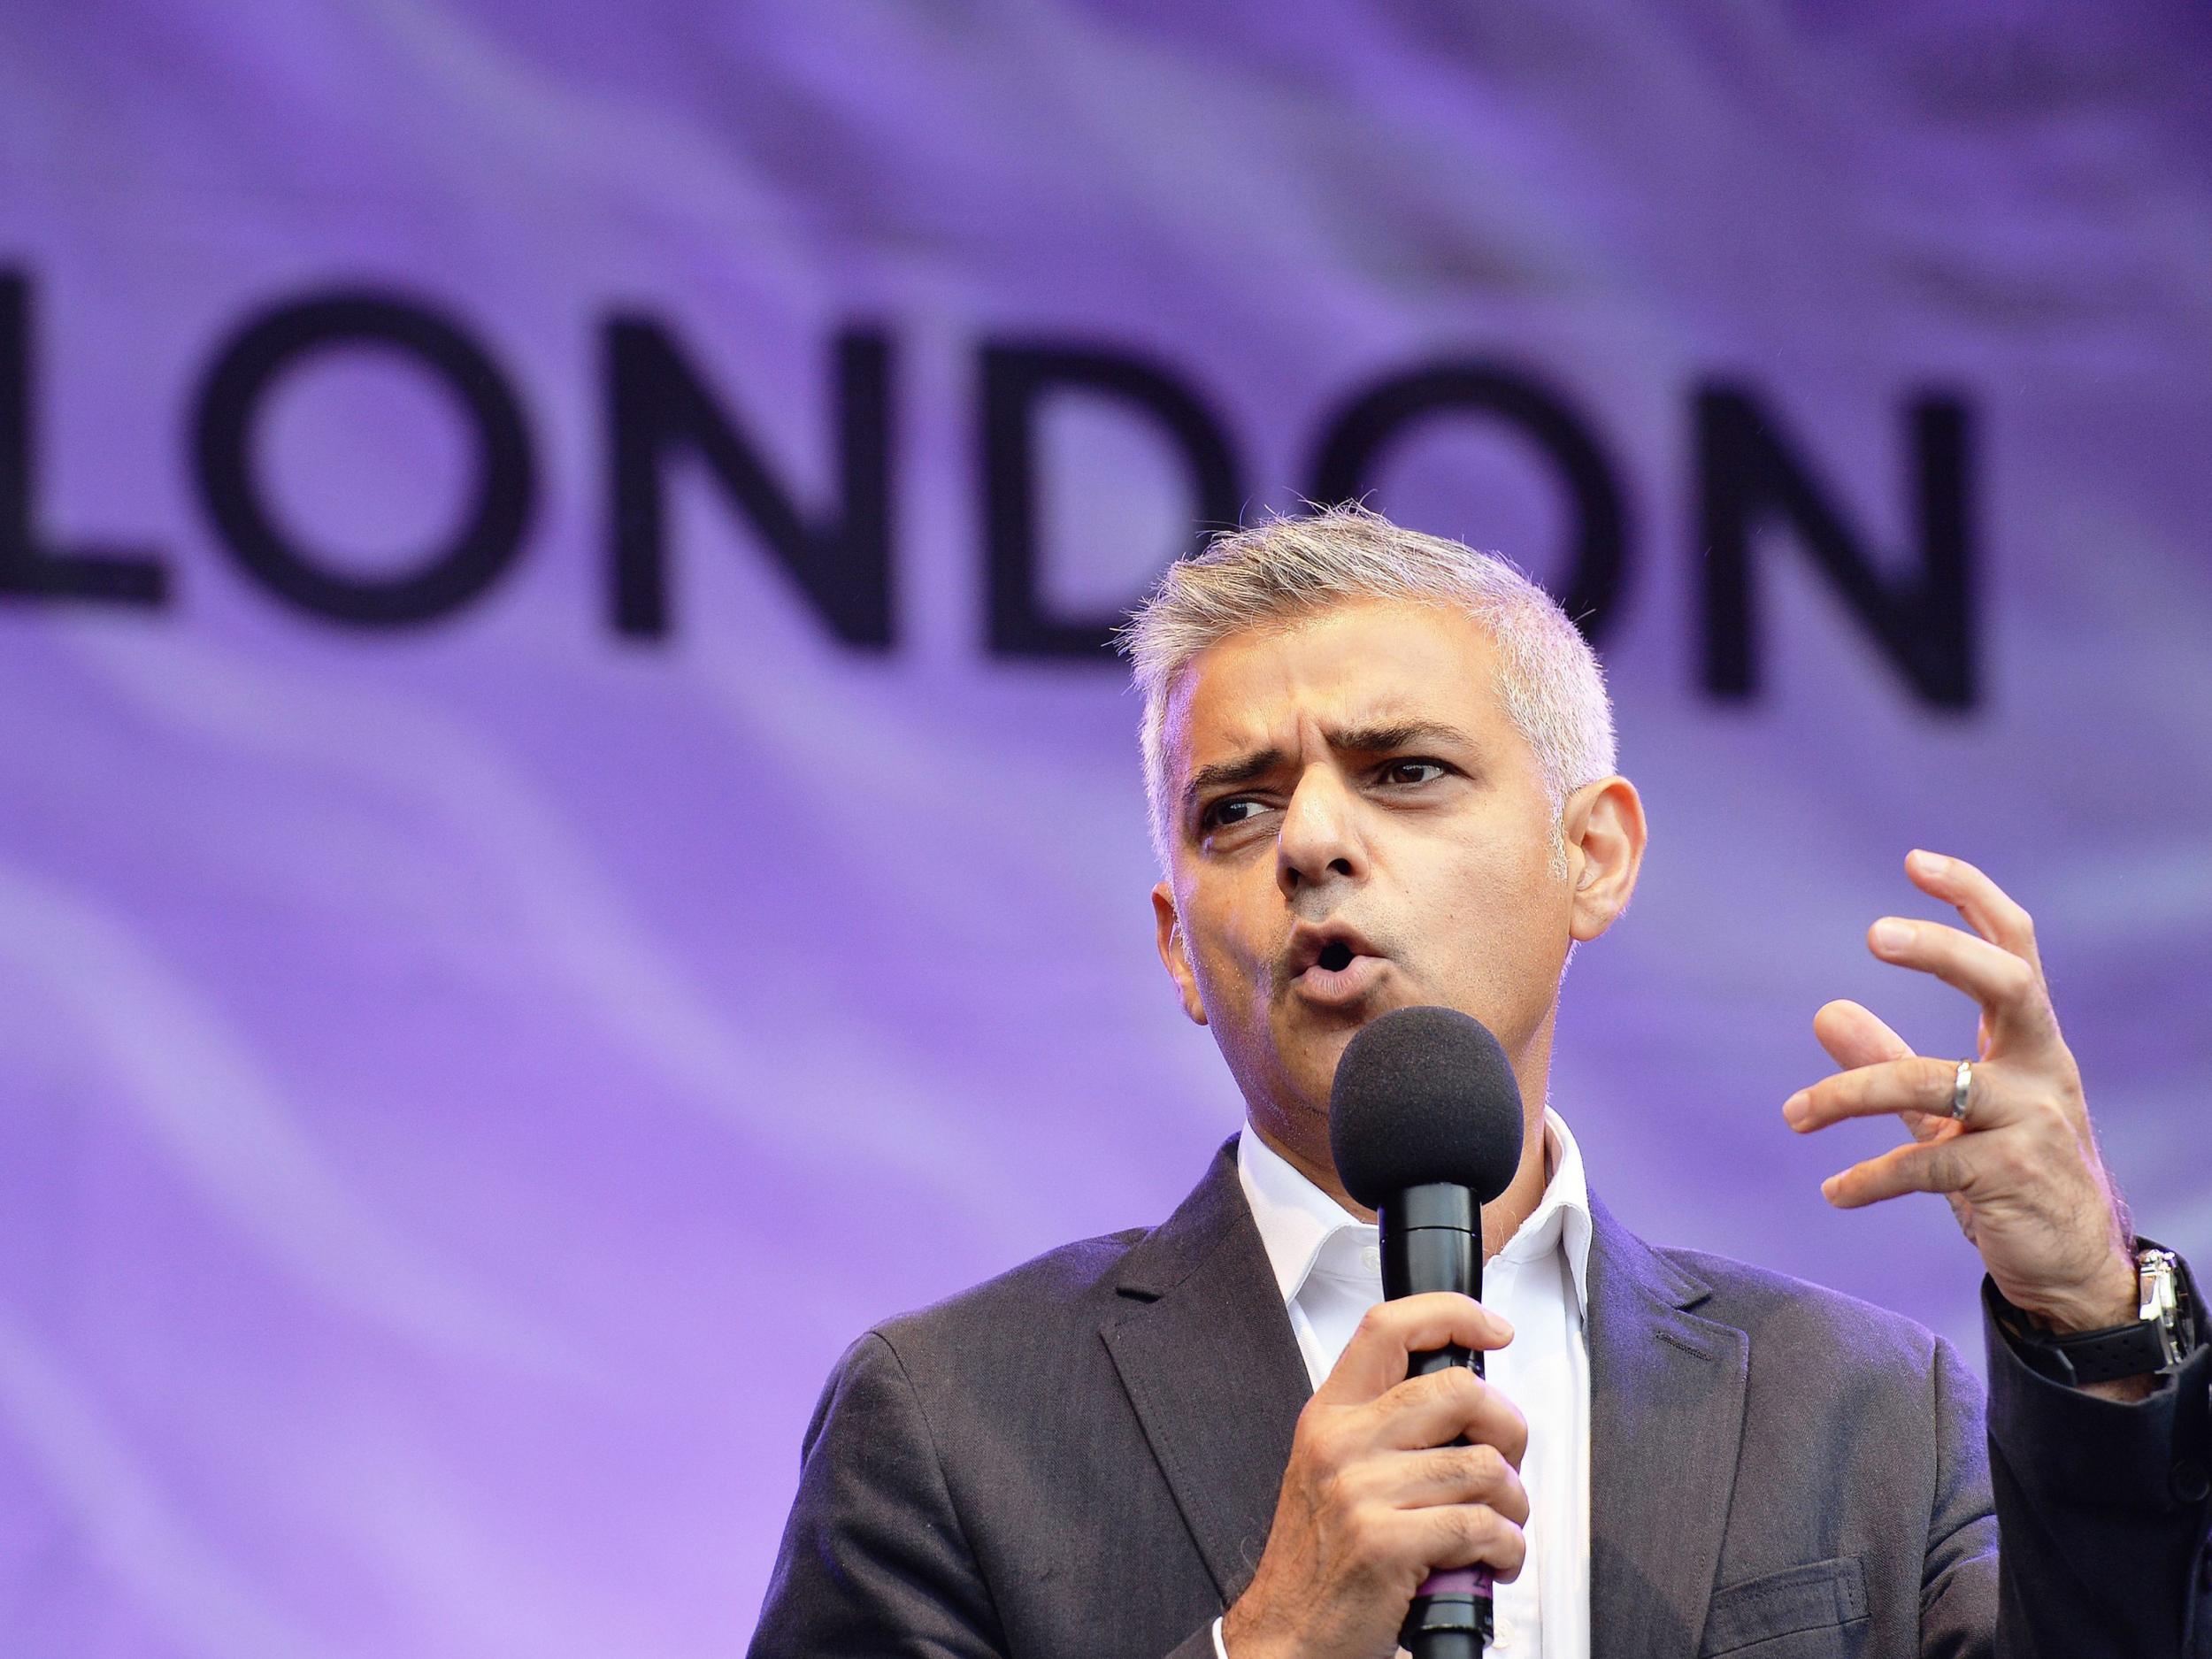 Sadiq Khan's relationship with startups has been mixed, with Uber's licensed revoked in September